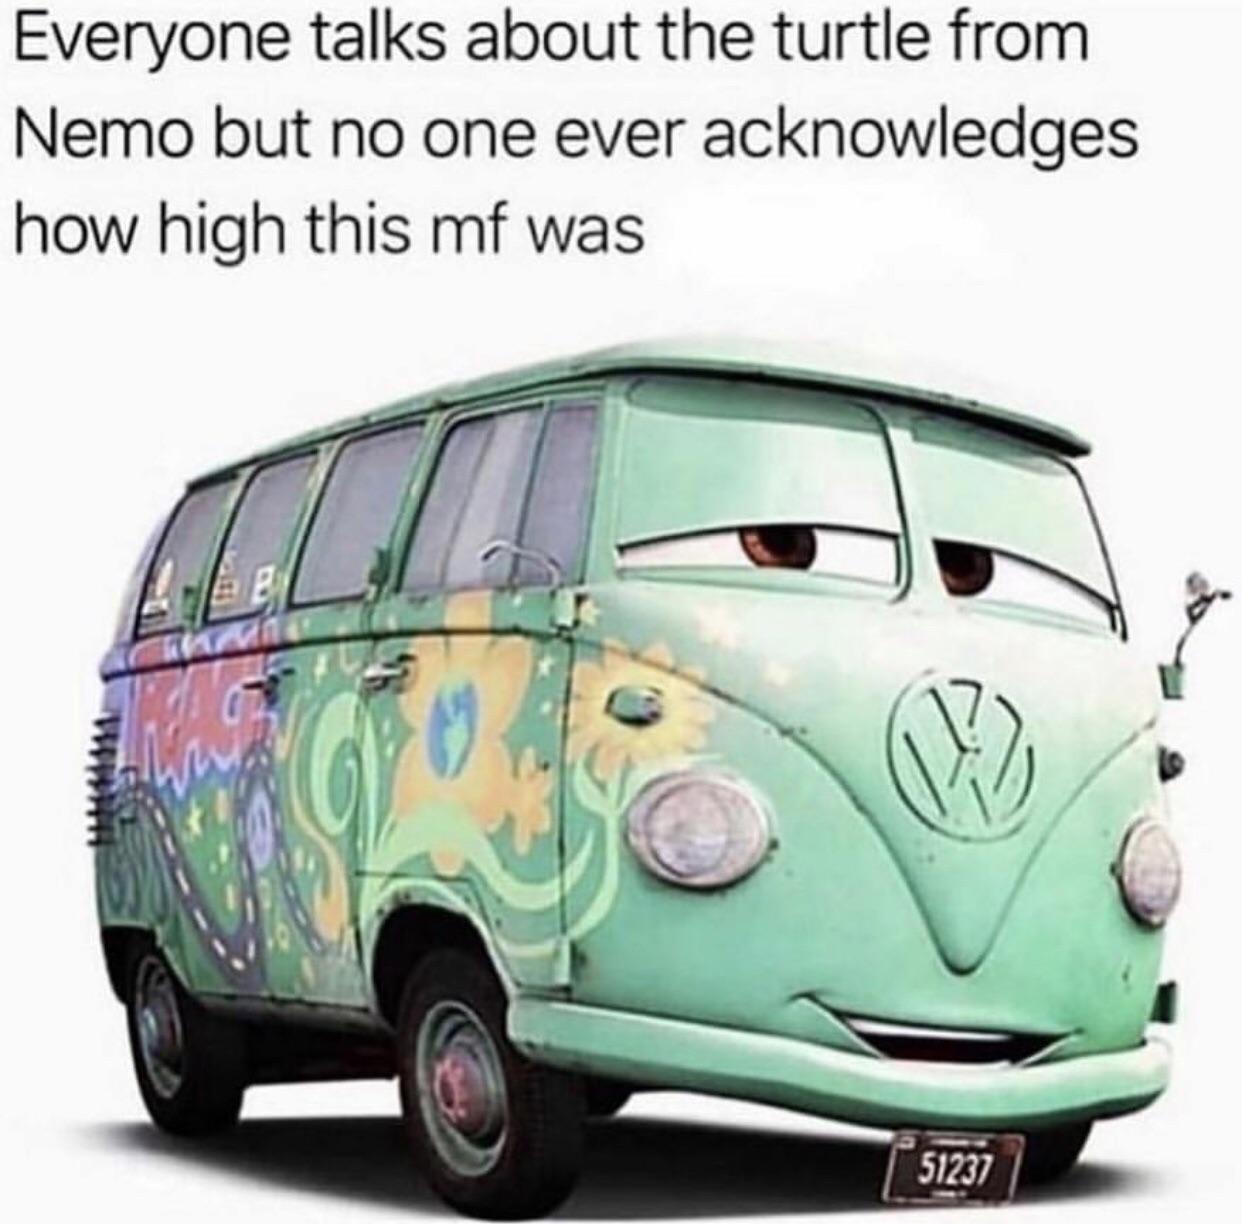 awesome pics and memes - fillmore cars - Everyone talks about the turtle from Nemo but no one ever acknowledges how high this mf was 51237